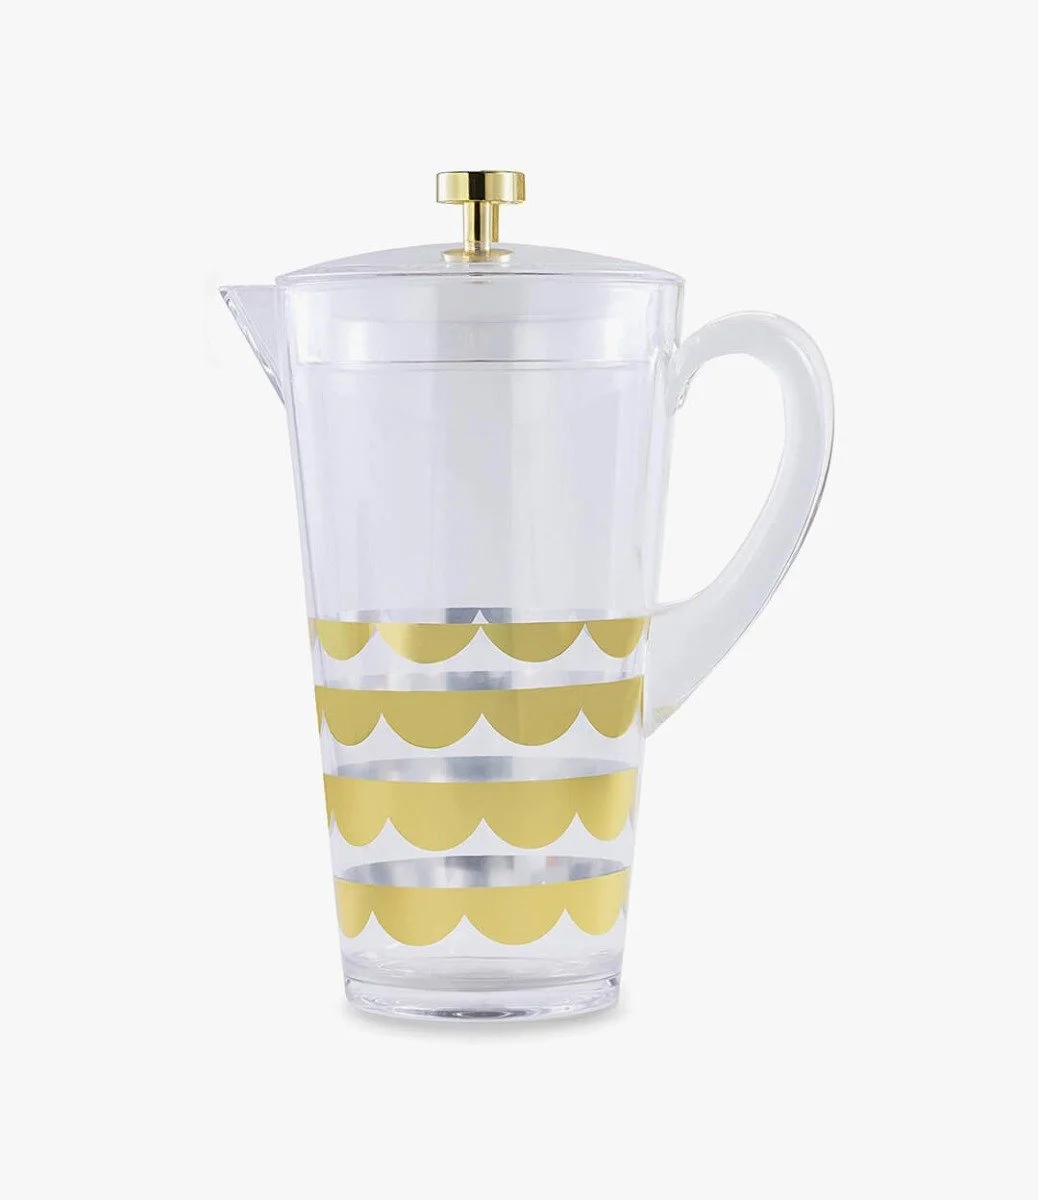 Acrylic Gold Scallop Pitcher by Kate Spade New York